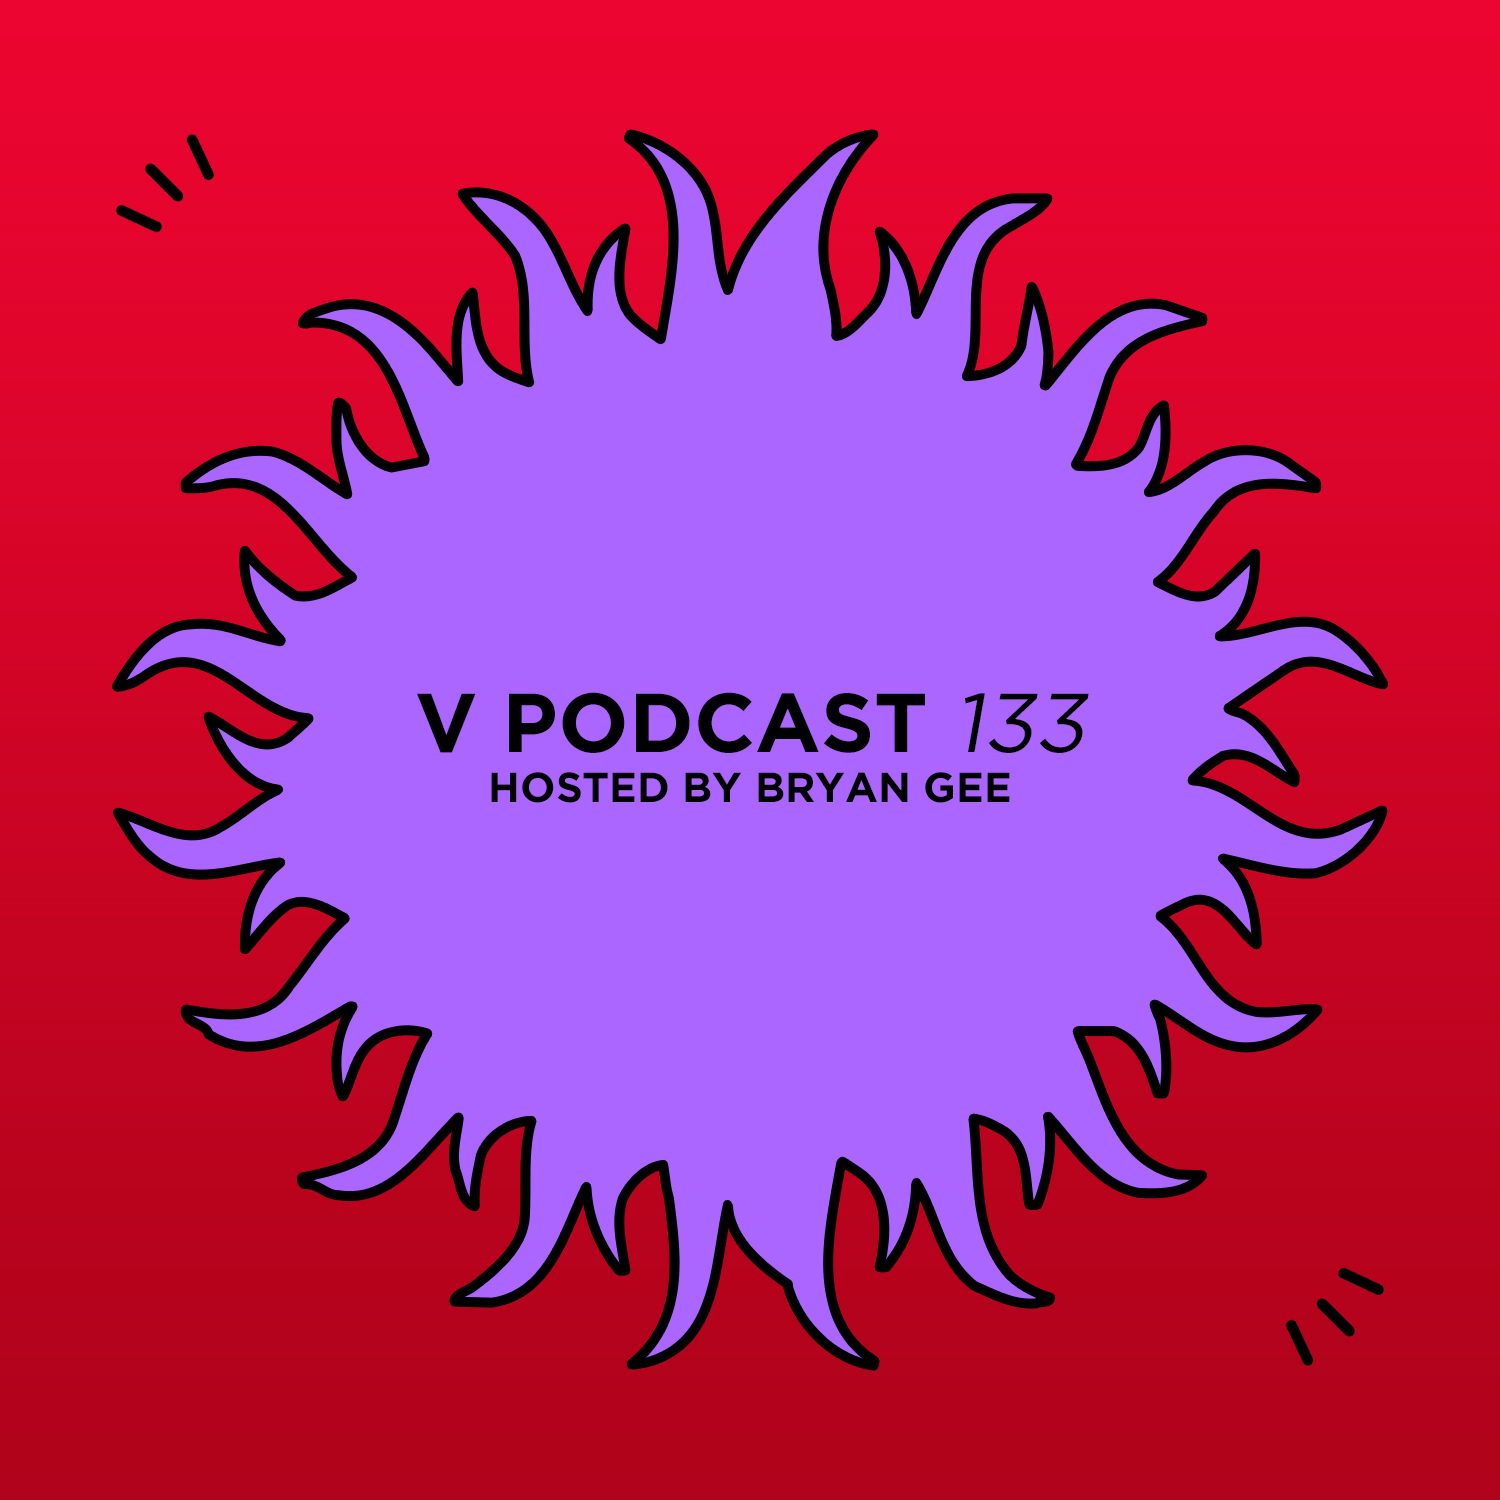 V Podcast 133 - Hosted by Bryan Gee Artwork